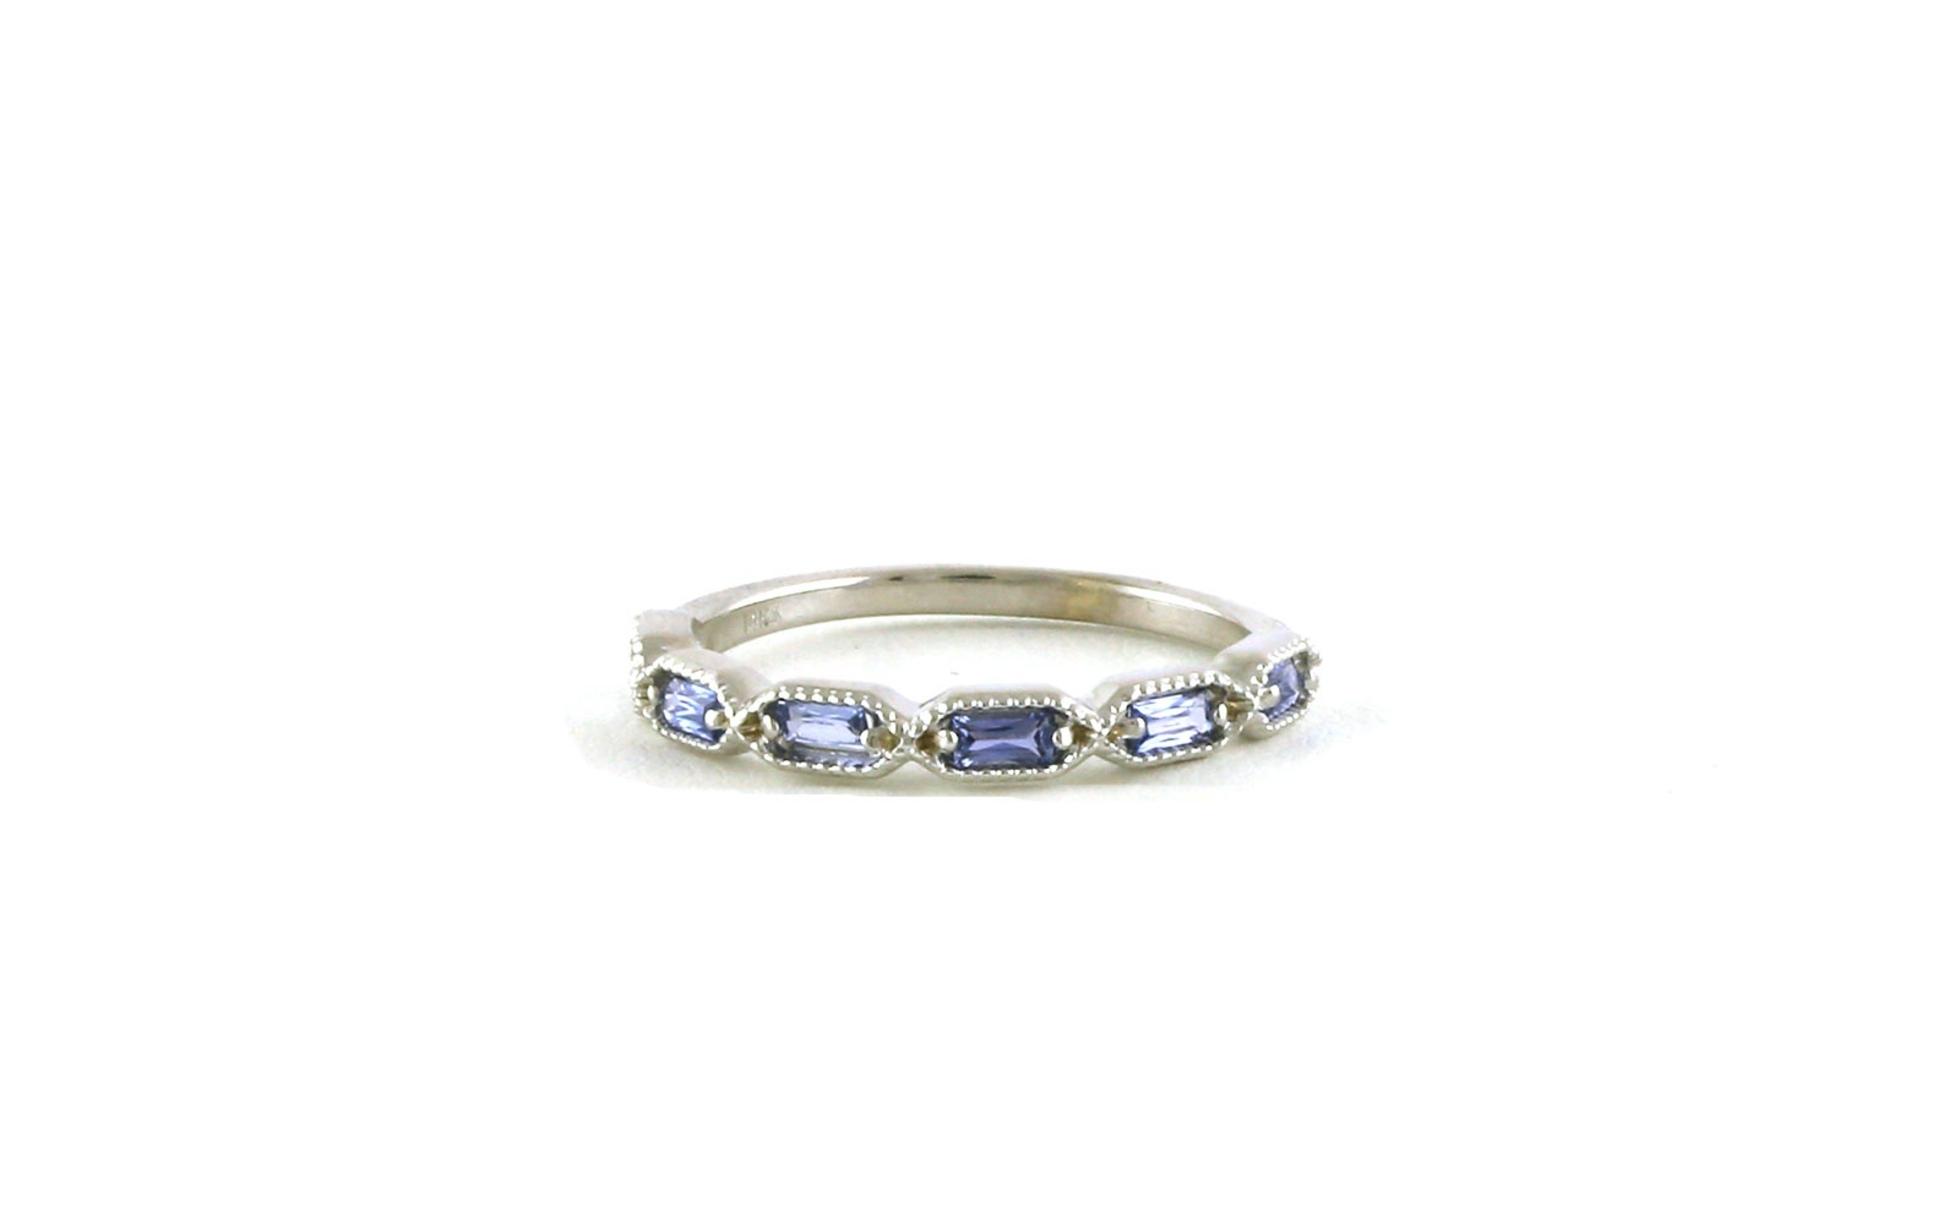 6-Stone Milgrain Hexagonal Ring with Baguette-cut Montana Yogo Sapphires in White Gold (0.35cts TWT)